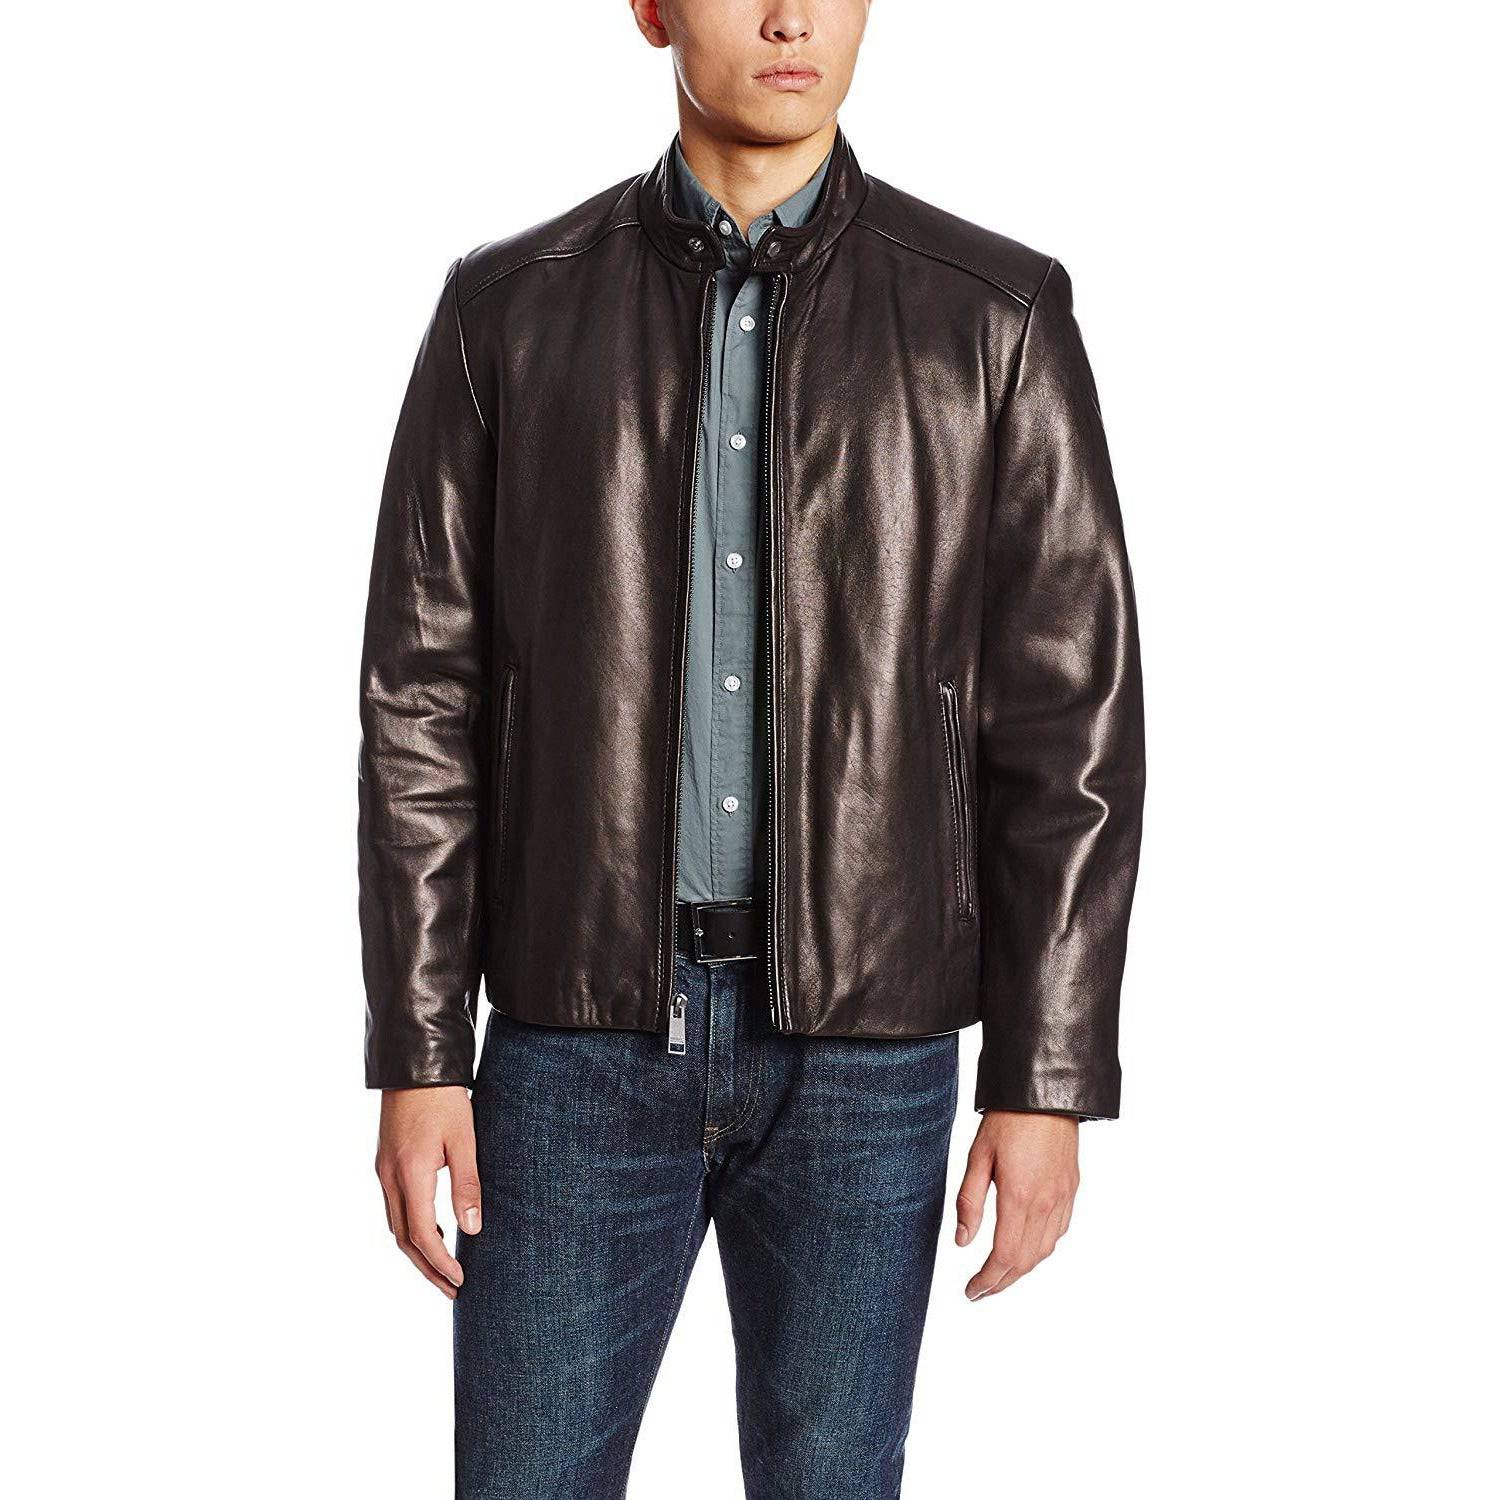 Marc New York by Andrew Marc Men's Sam Smooth Lamb Leather Jacket